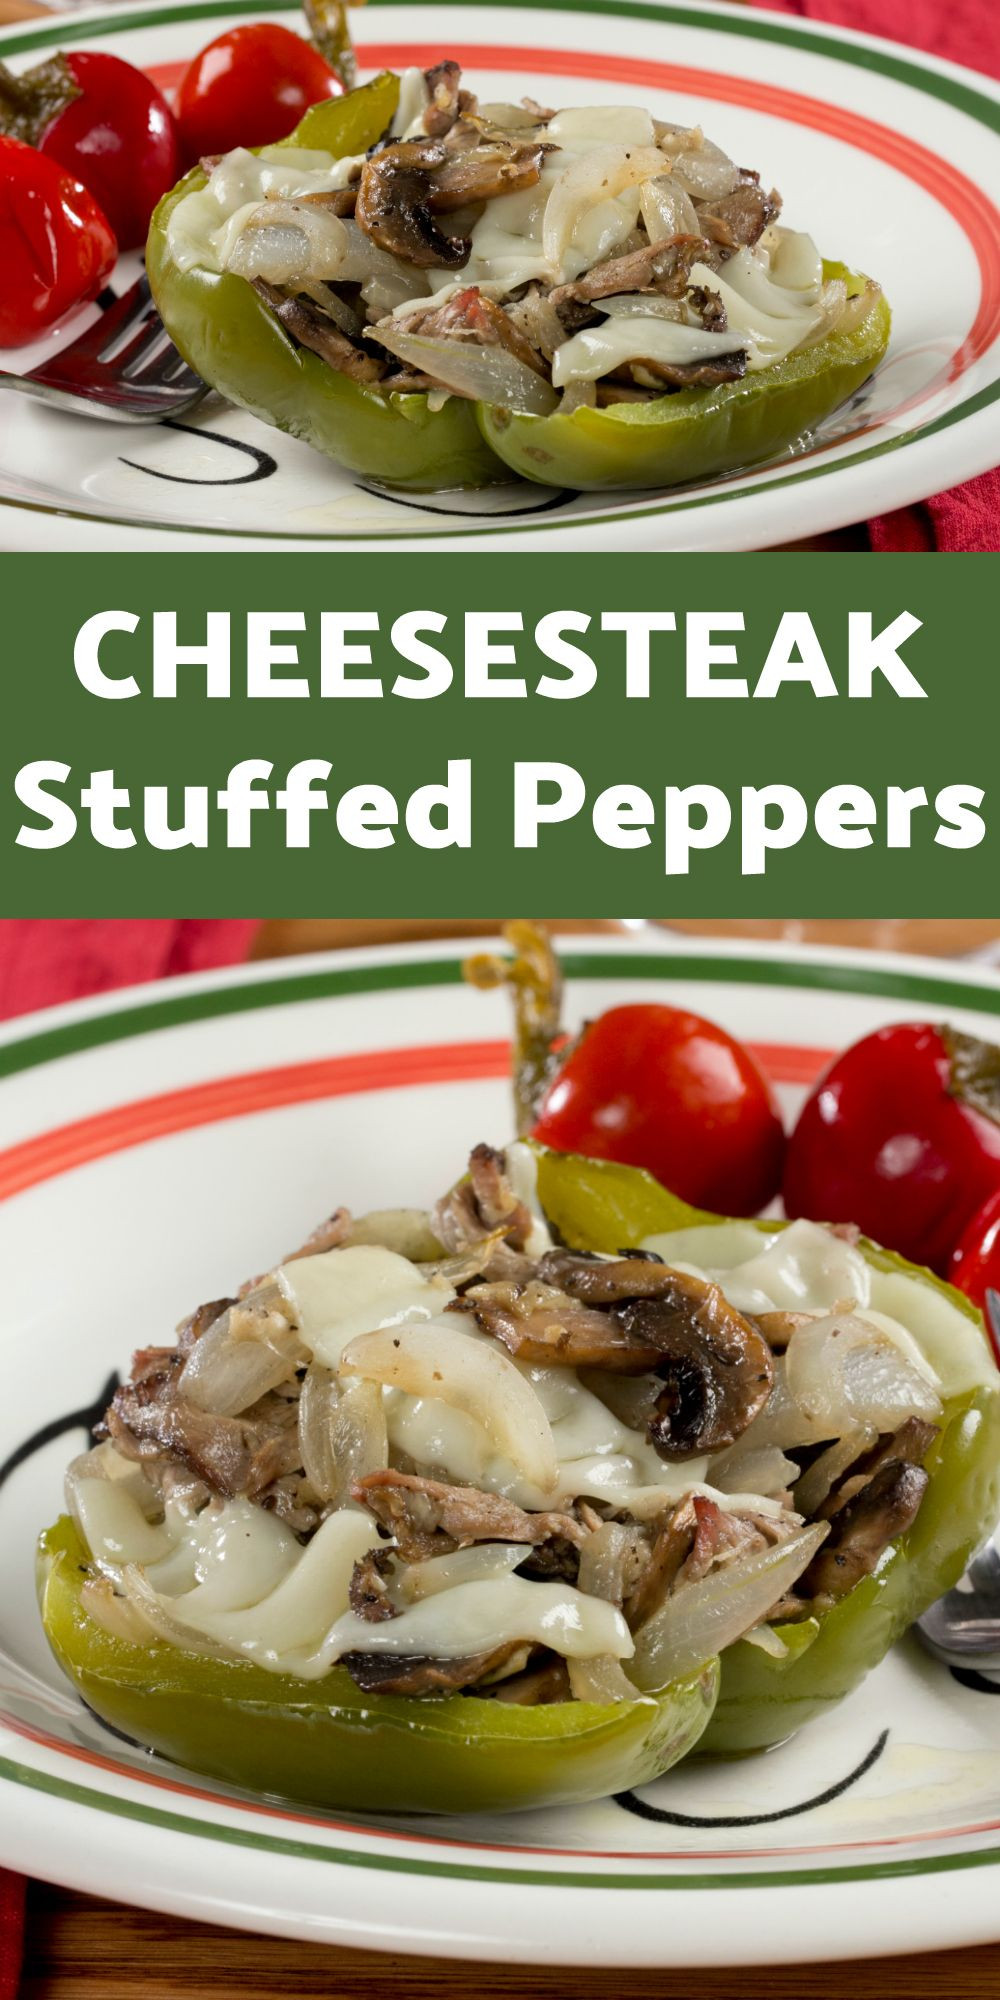 Dinner Recipes For Diabetic
 We stuffed all the goodness of a Philly cheesesteak into